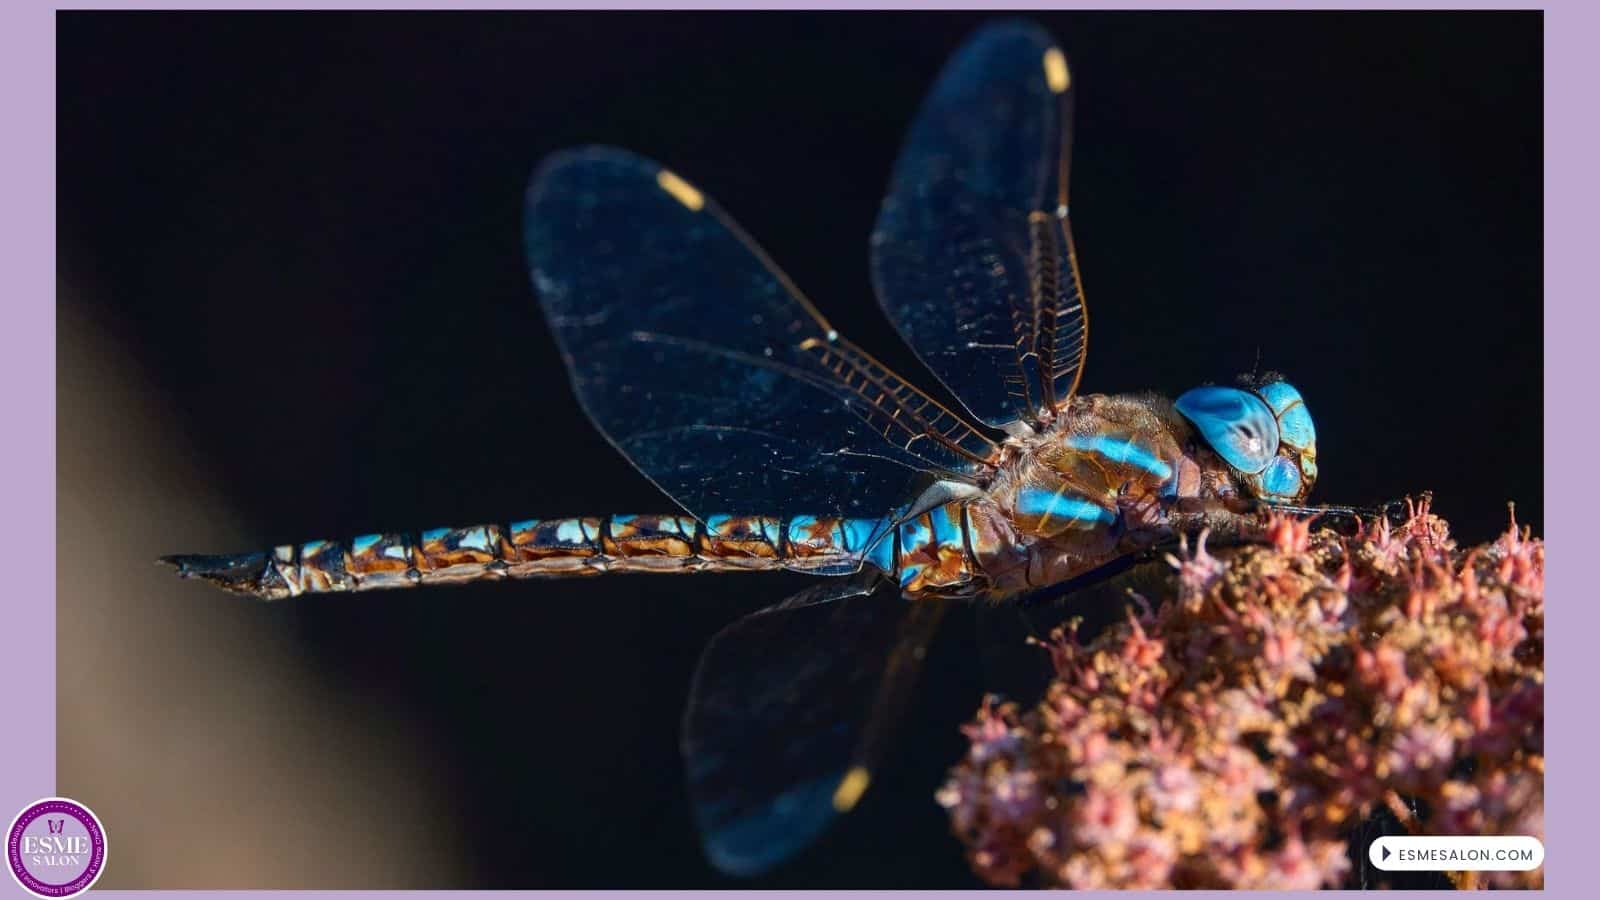 an image of a Dragonfly from the side